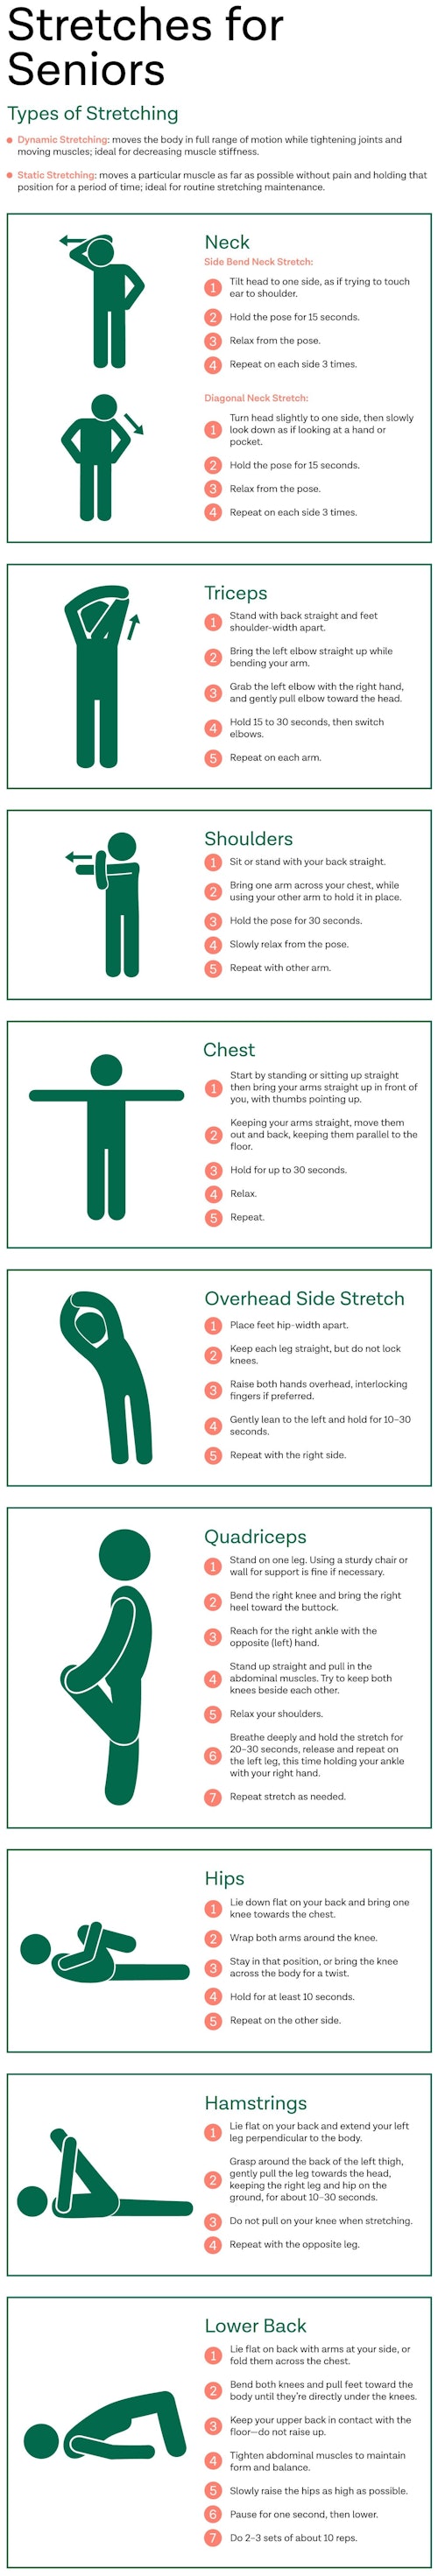 Various stretches to practice as you age